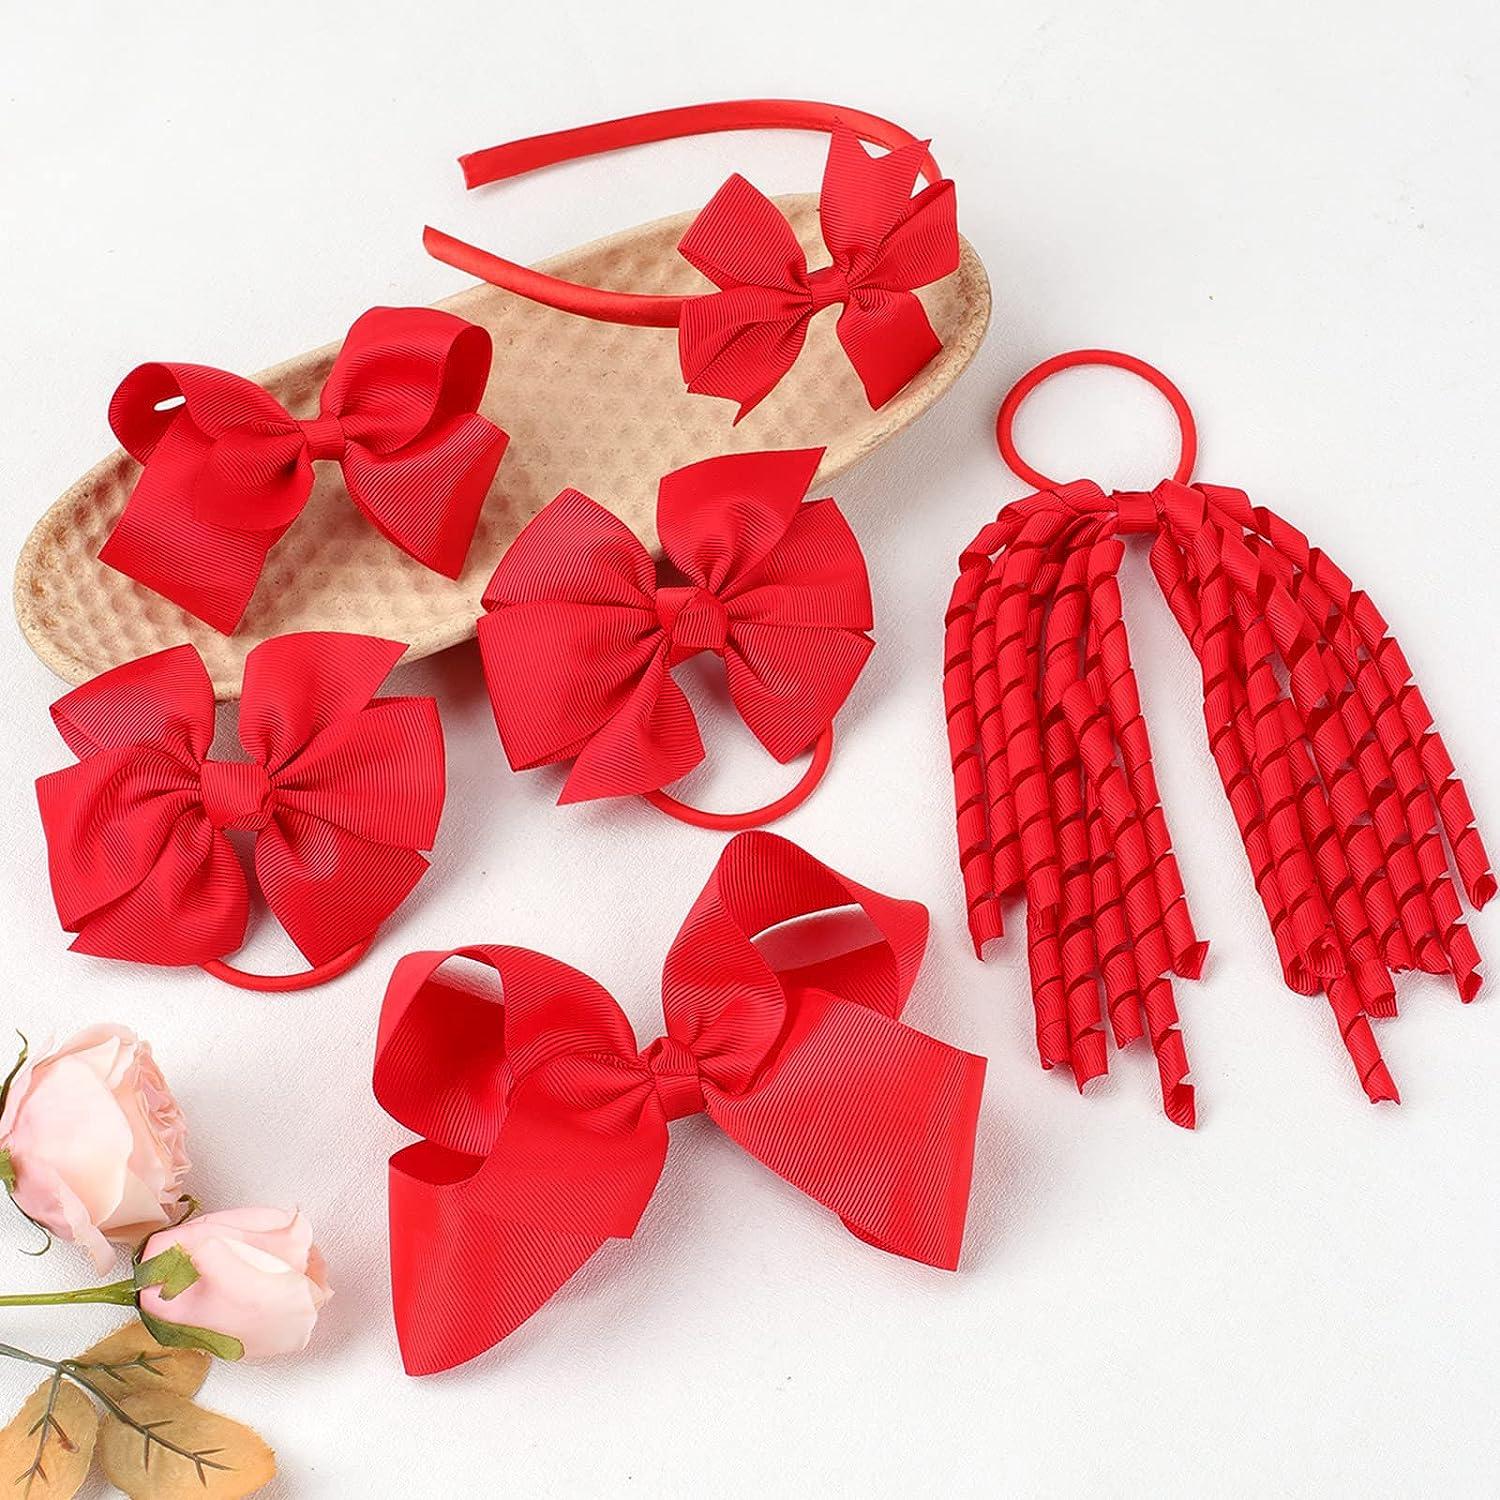  FOMIYES 10 pcs fabric butterfly hairpin large bow hair  accessories vintage hair large bow hair barrettes hair bows red ribbon for  hair red bows large hair bow clip big hairpin